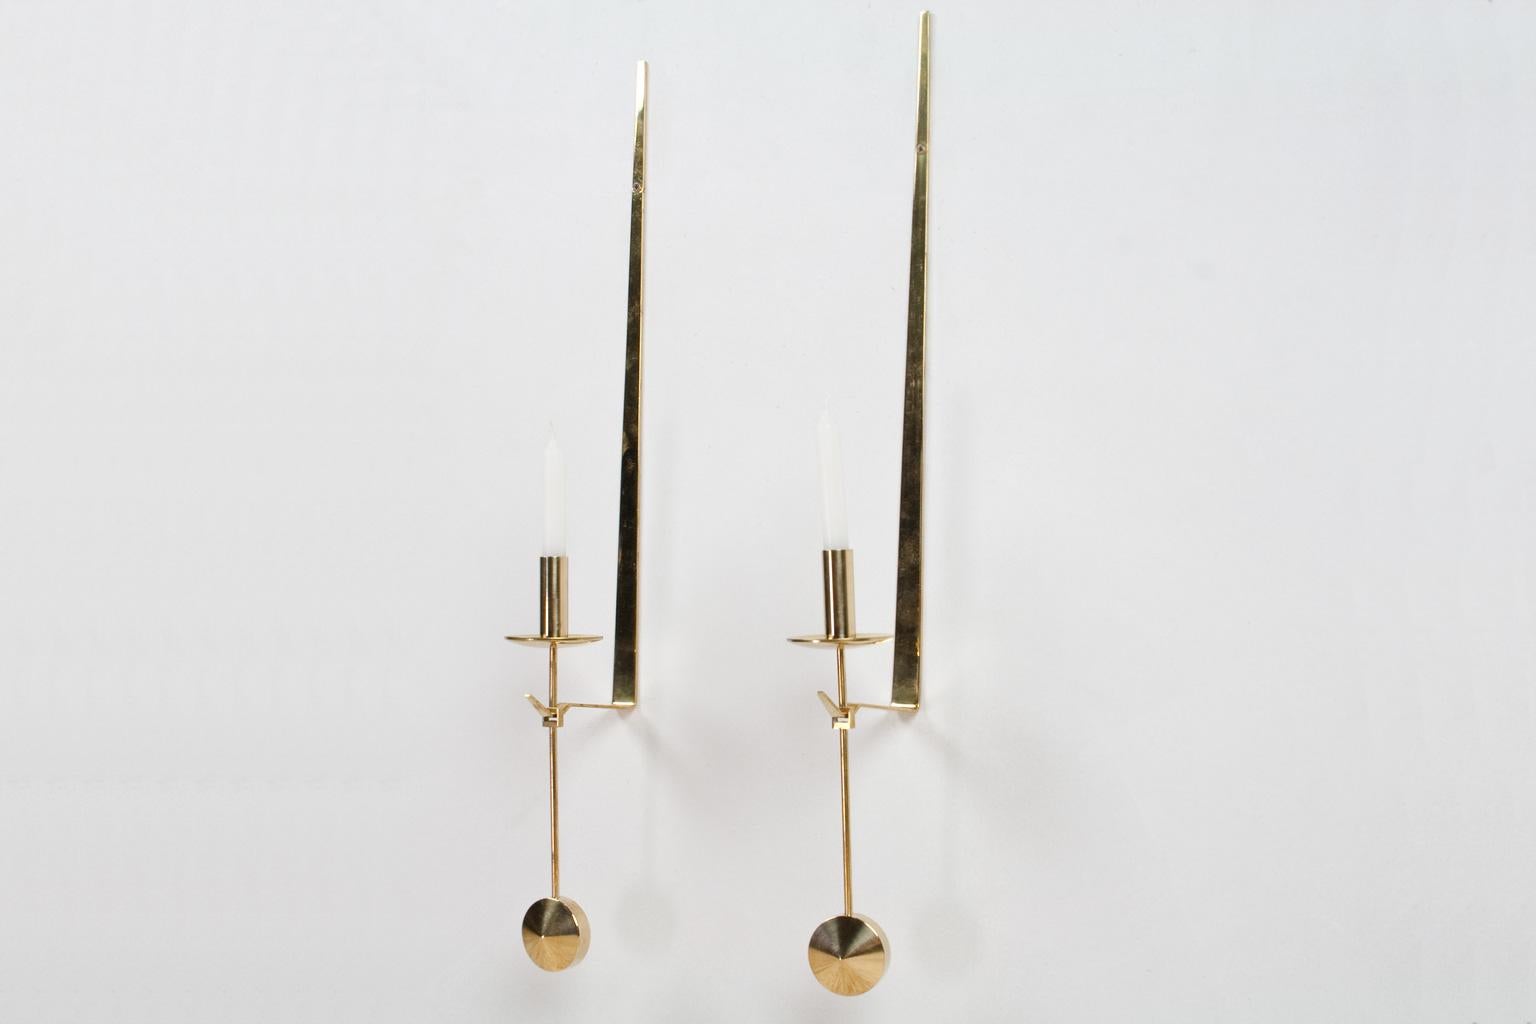 Pair of elegant Scandinavian Modern brass 'Pendeln' wall-mounted candleholders by Pierre Forssell, design later part of the 1950s. Brand present. The set is in good vintage condition. Originated from Sweden 1960s-1970s. For the Pendel holder use